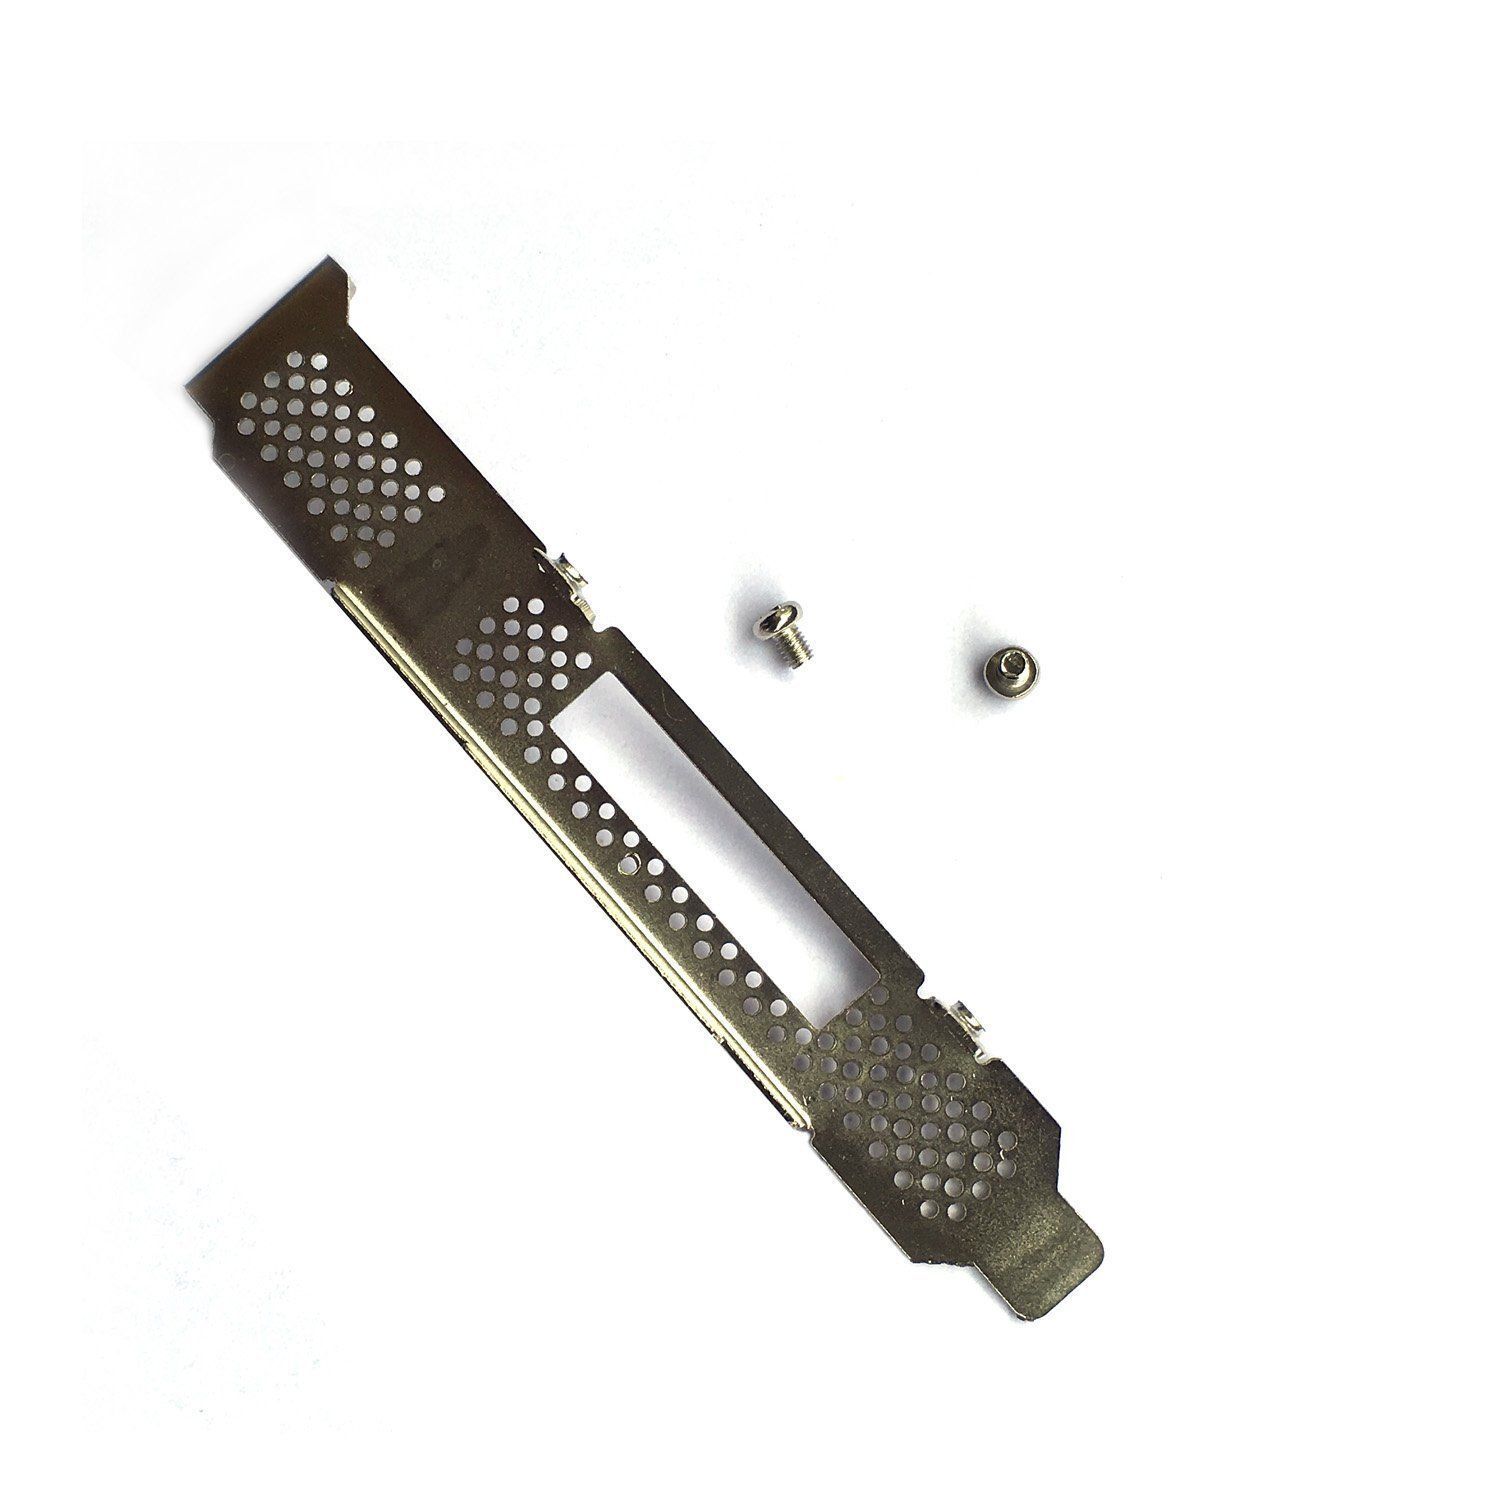 Full Height Bracket for LSI 9280-8e, 9200-8e, Dell H810, HP 422 SFF-8088 From US